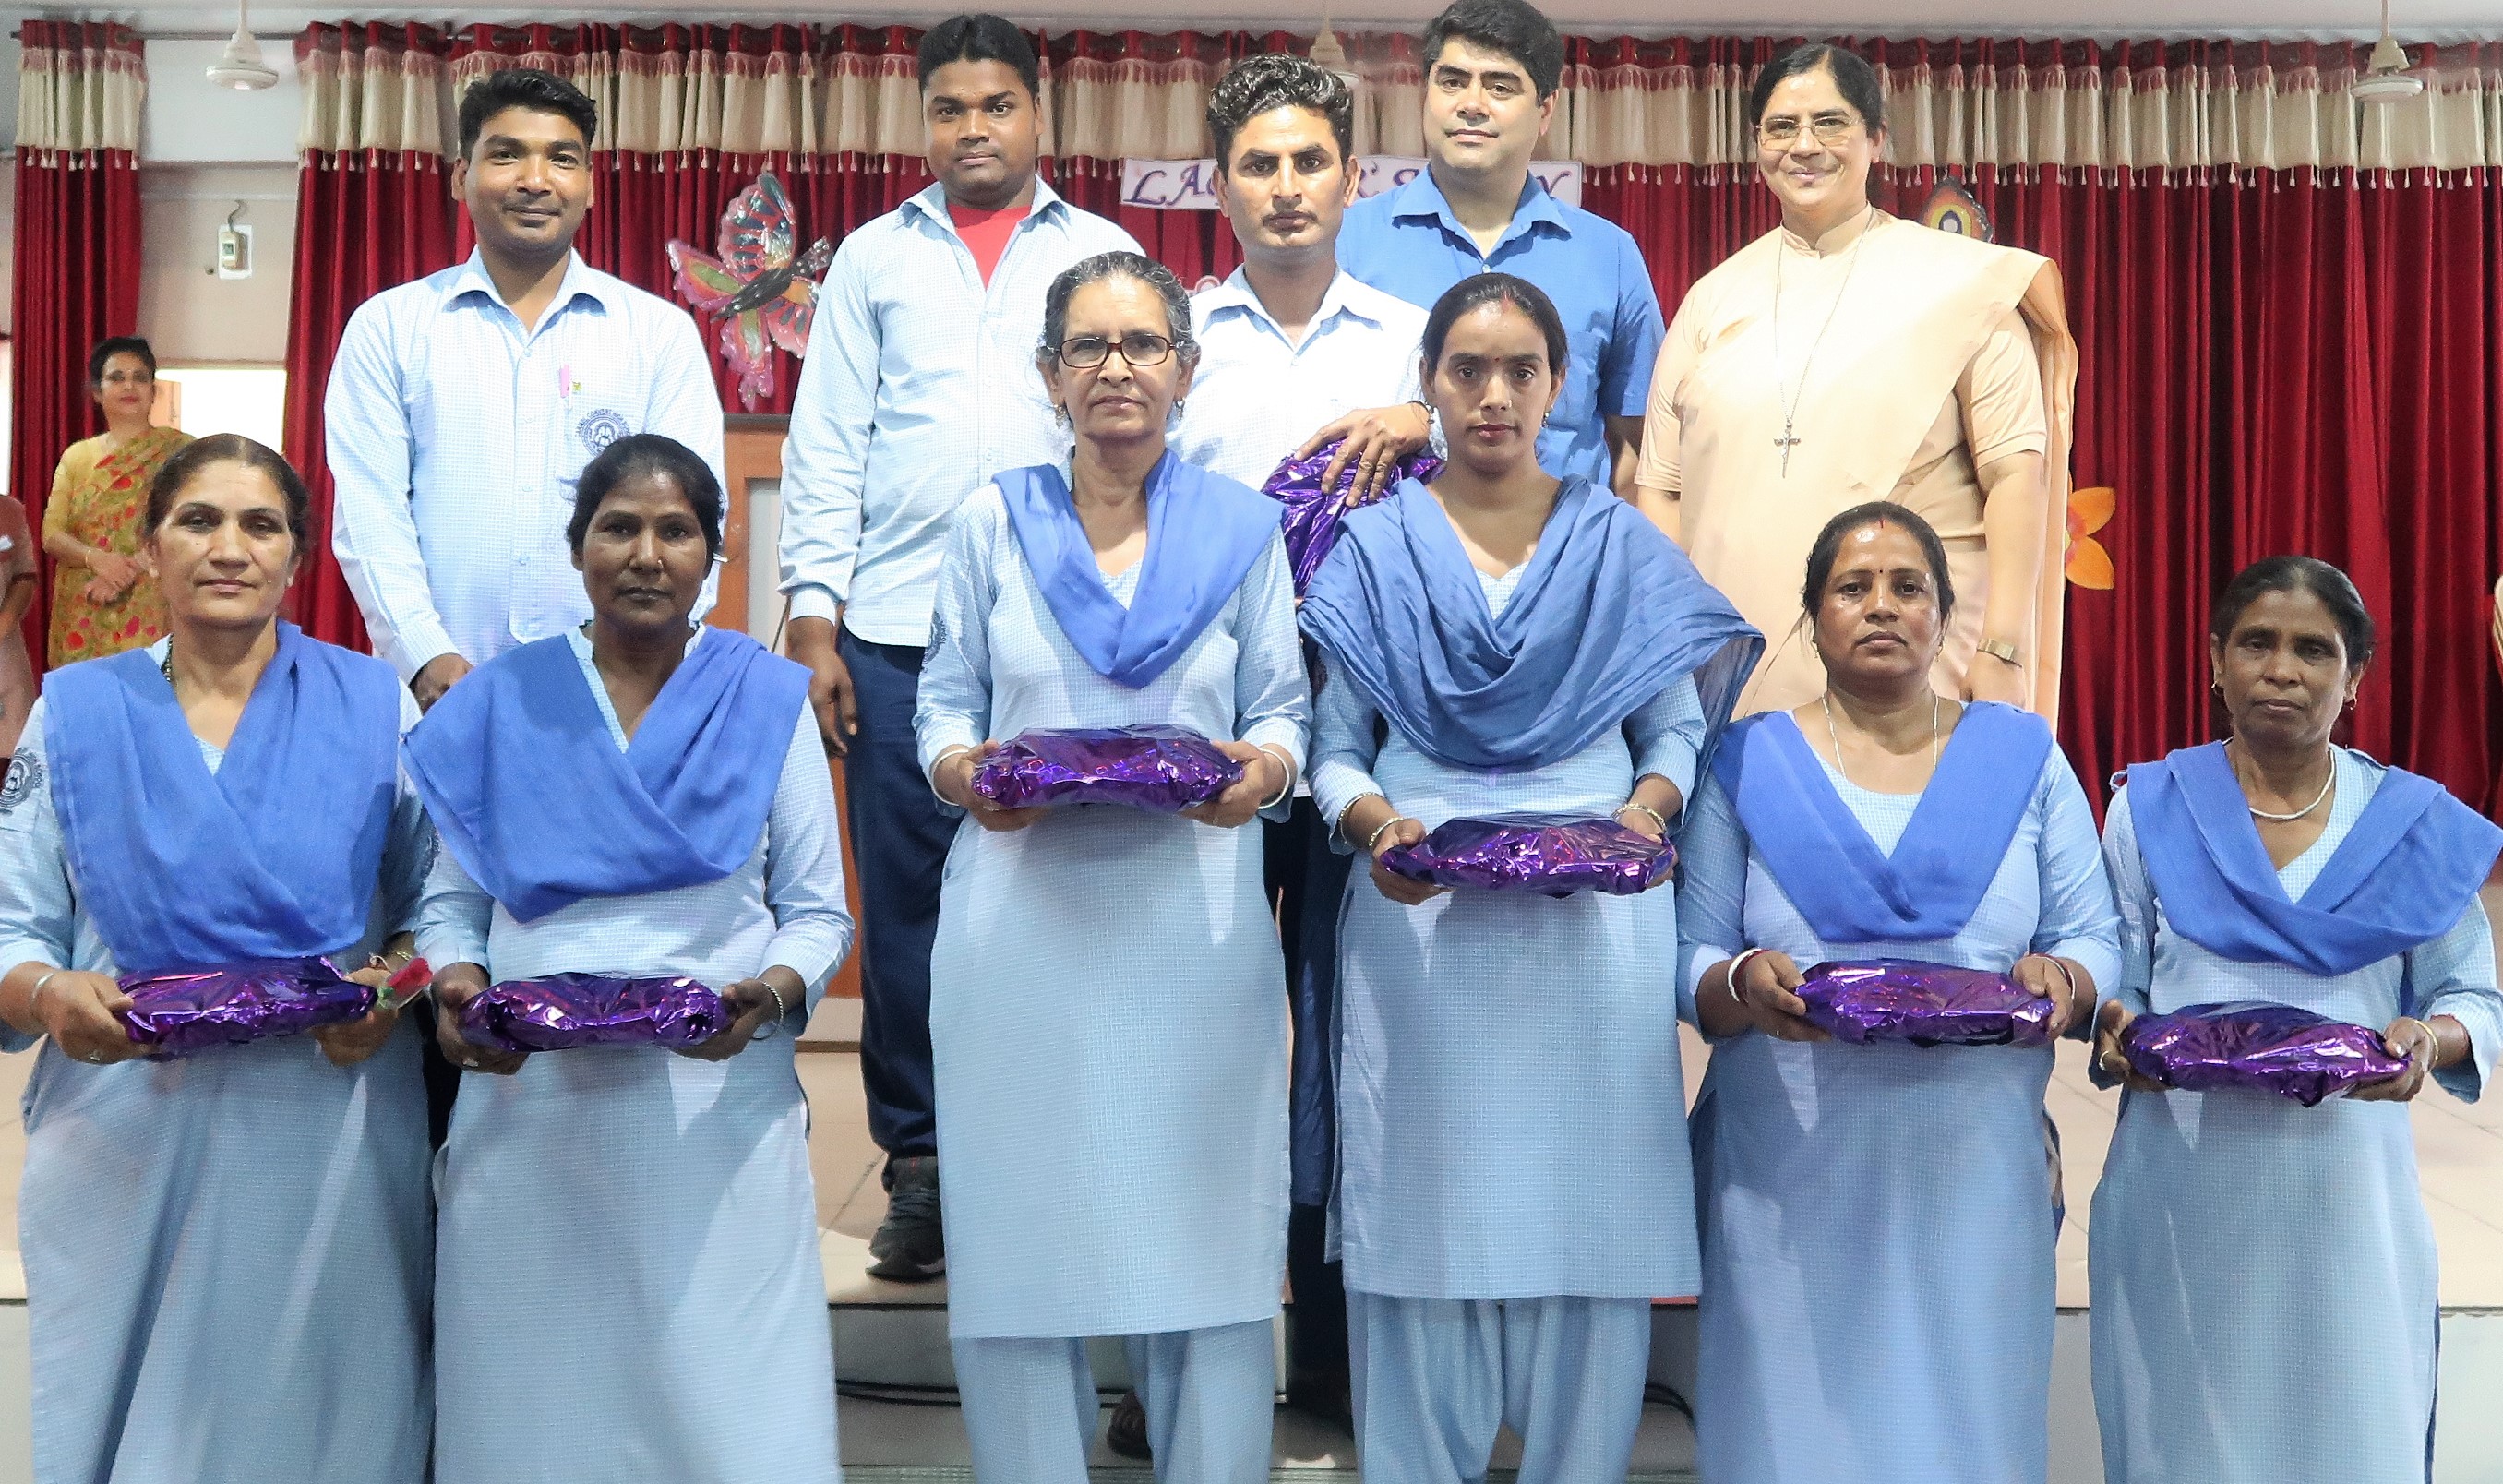 Carmel Convent Hr. Sec School celebrated International Workers’ Day  to express gratitude and acknowledge the painstaking efforts of the support staff.